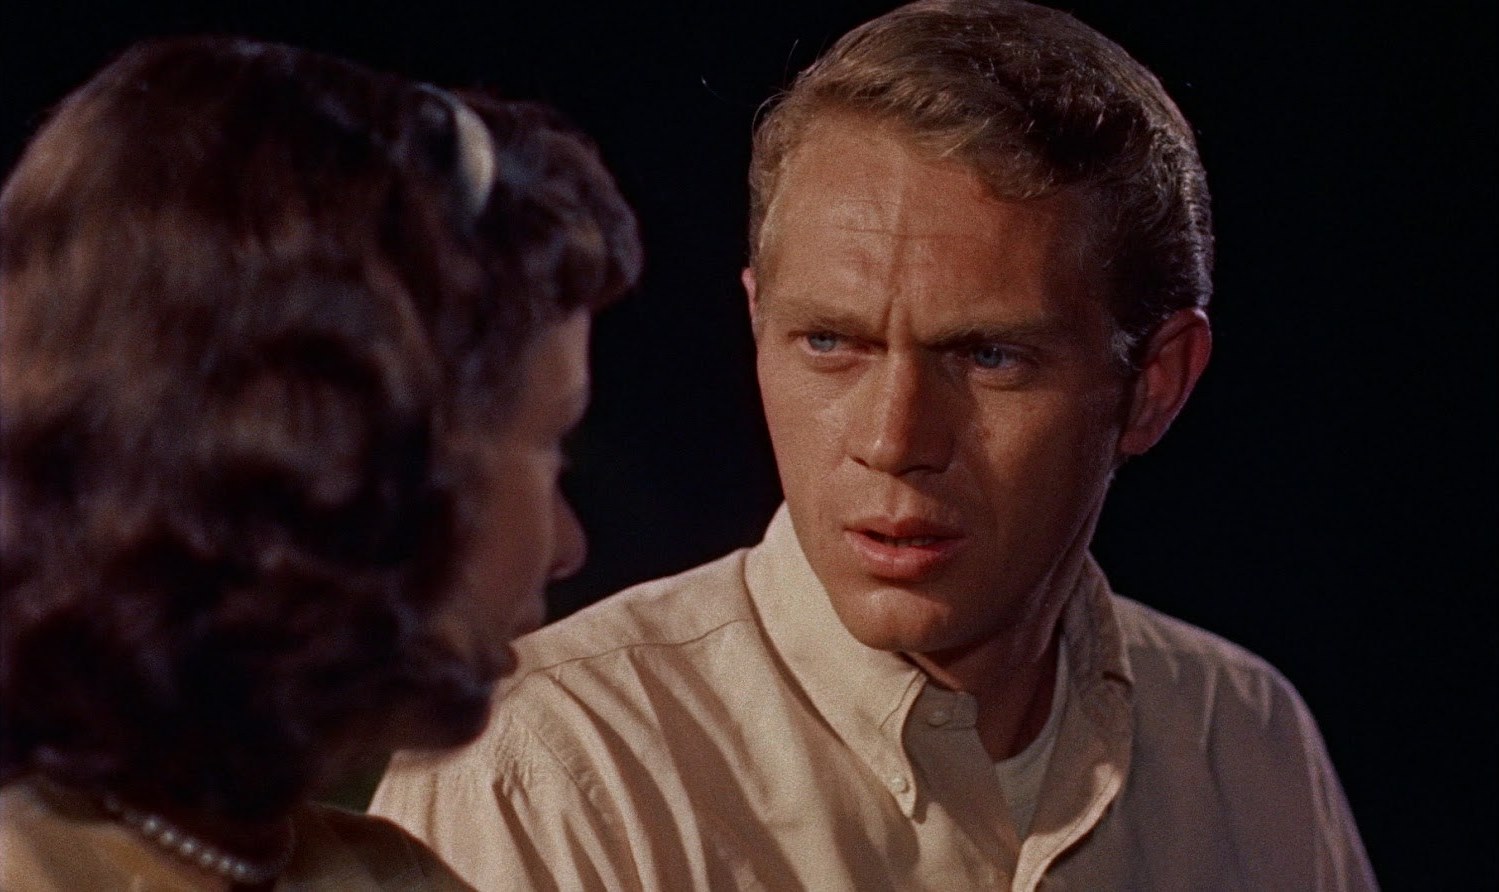 A 28 year-old Steve McQueen as a teenager along with girlfriend Aneta Corsaut in The Blob (1958)